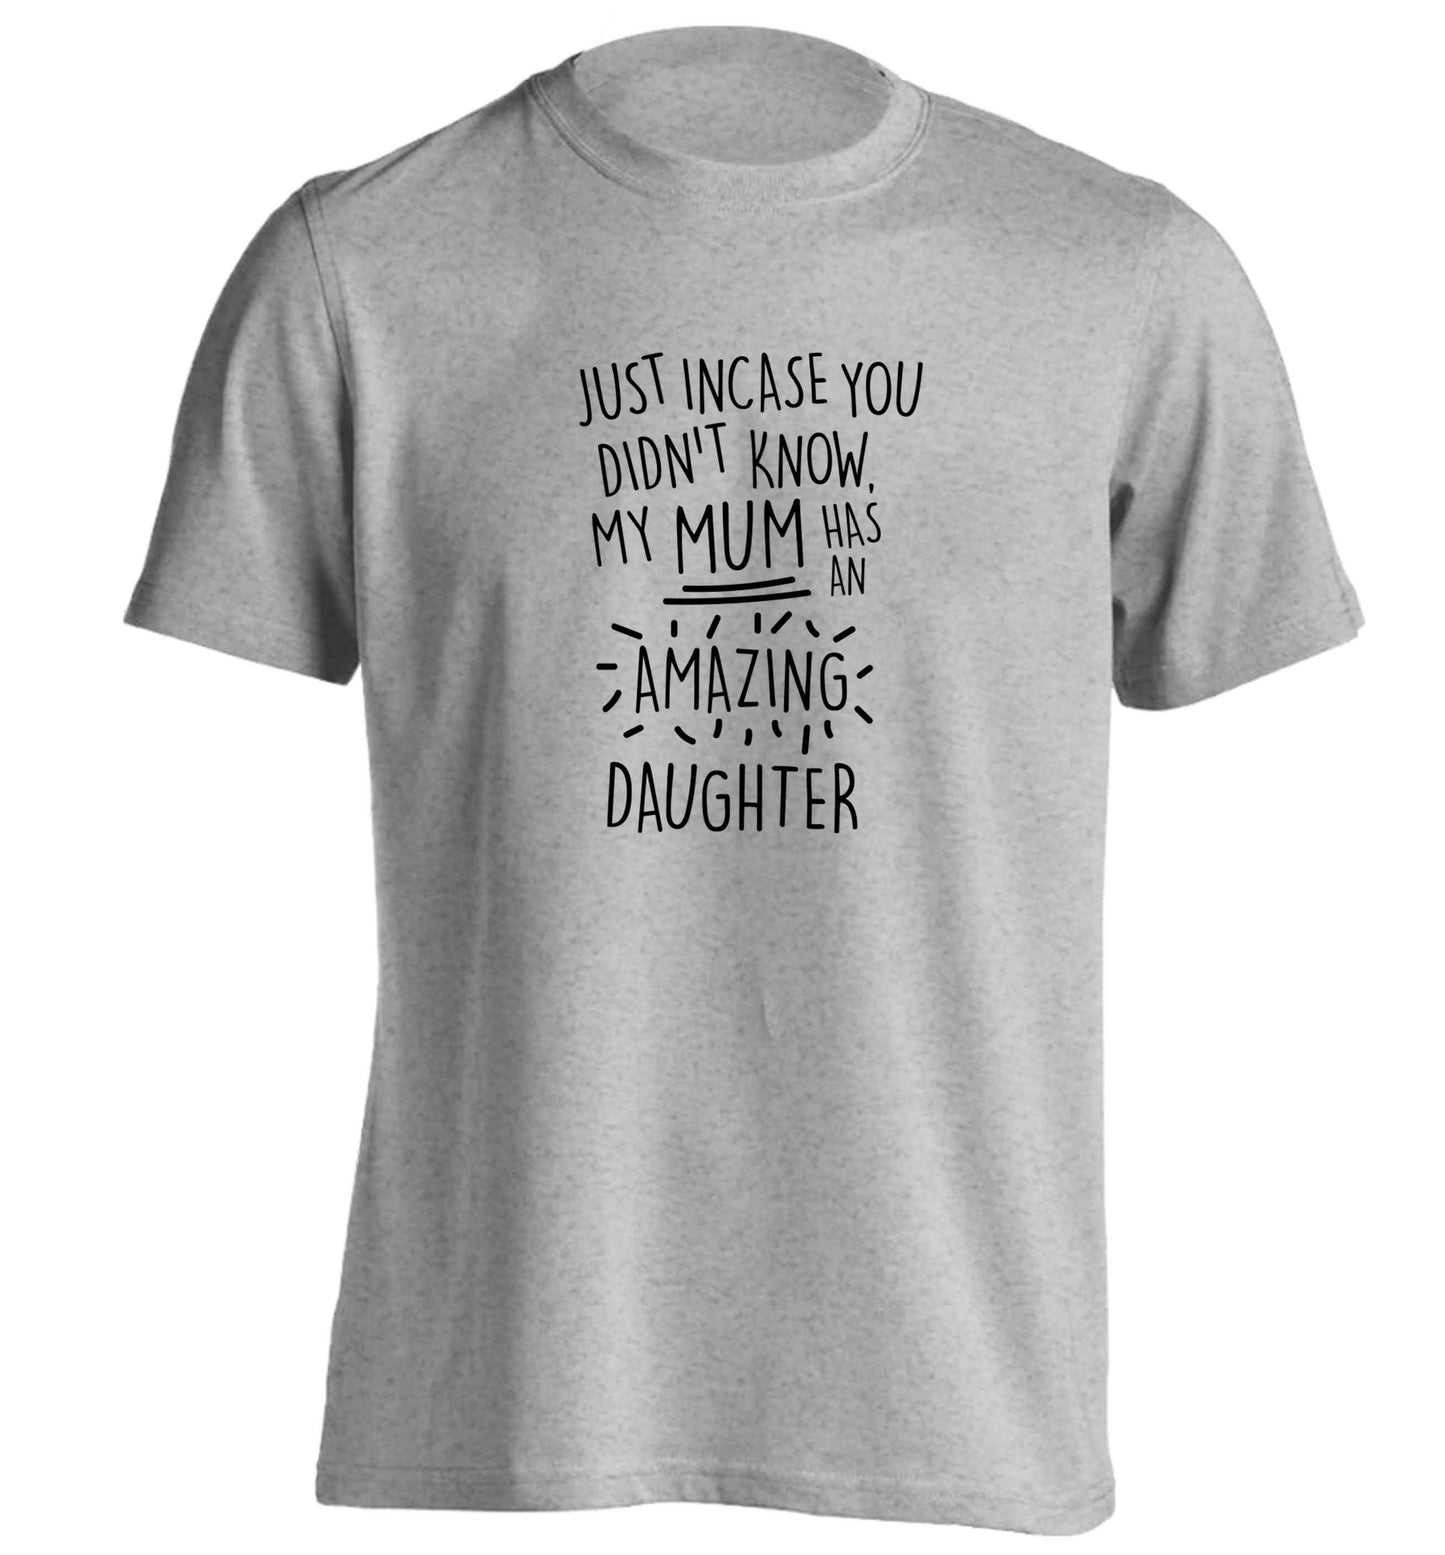 Just incase you didn't know my mum has an amazing daughter adults unisex grey Tshirt 2XL